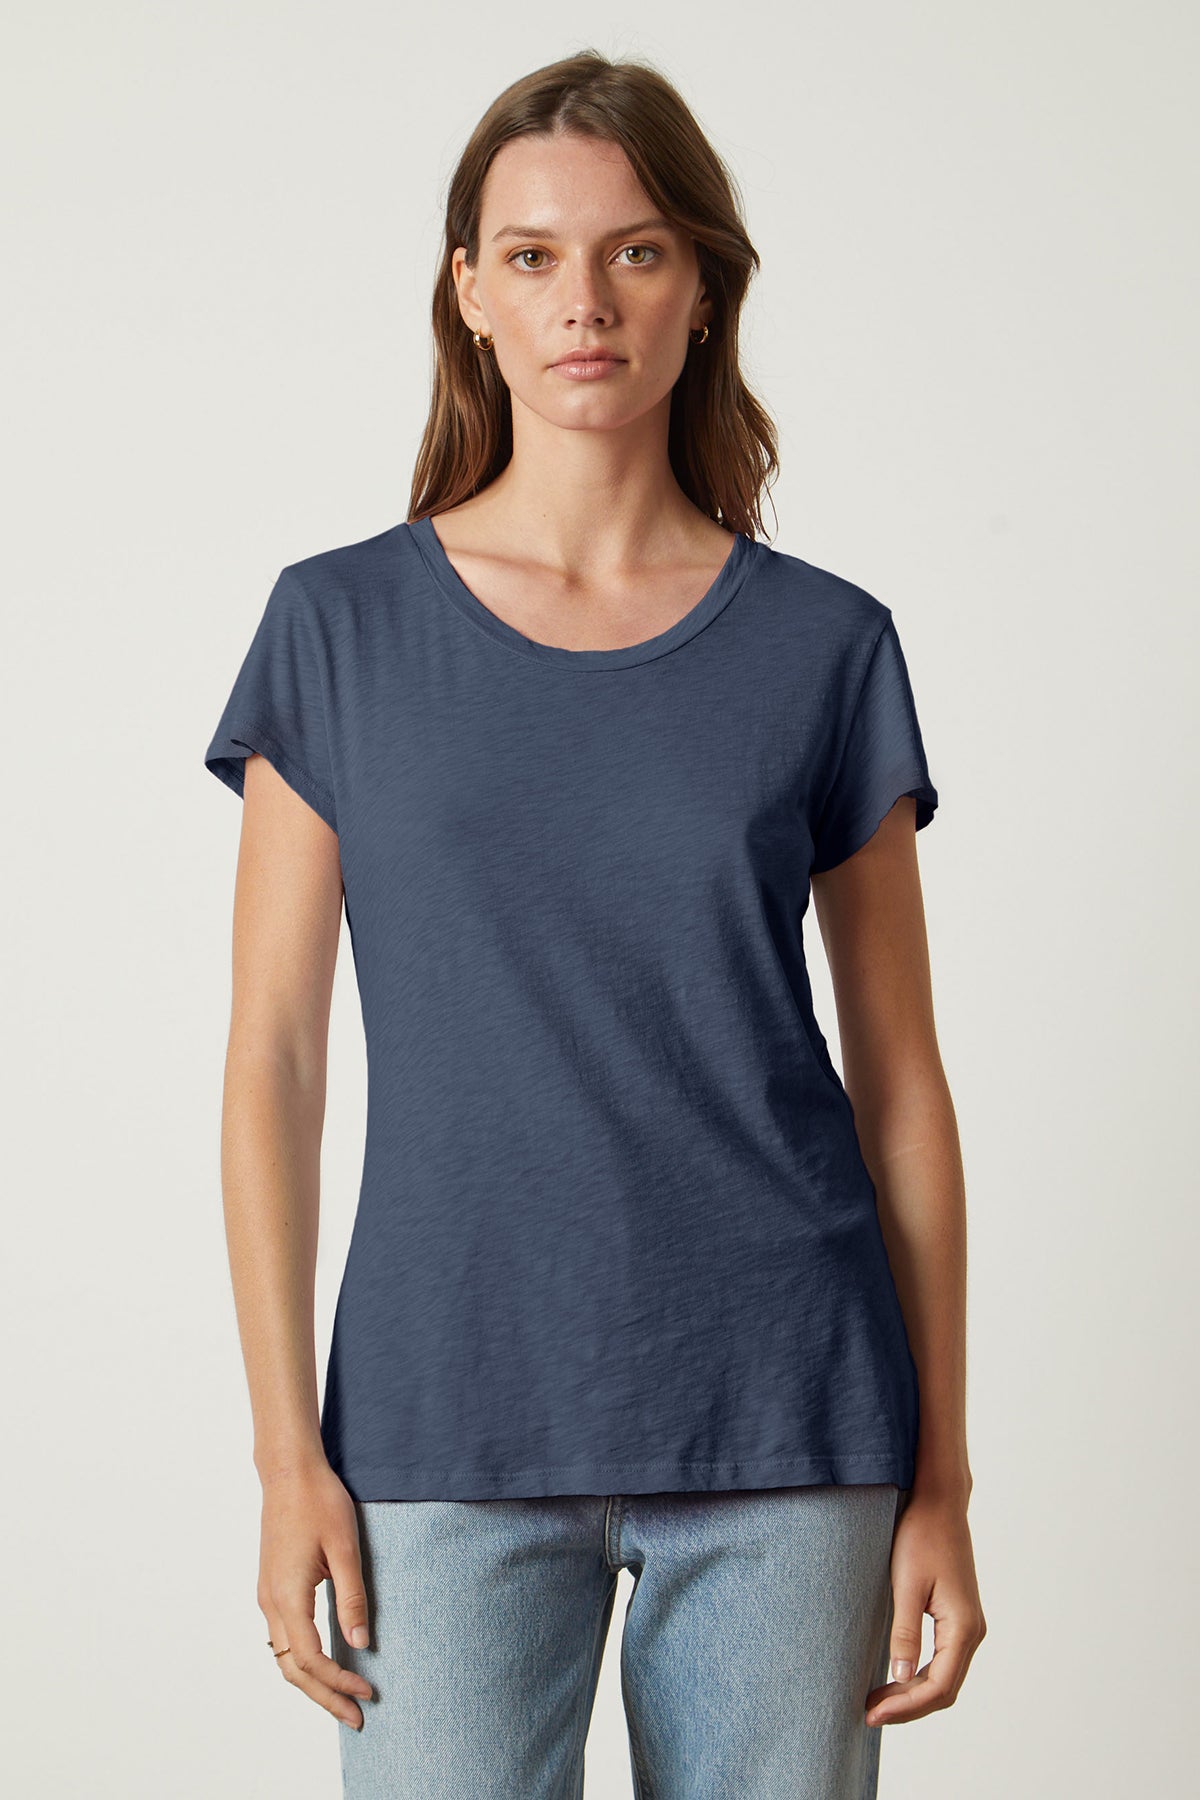 A woman wearing a plain, navy blue ODELIA TEE with a classic crew neckline by Velvet by Graham & Spencer stands against a light grey background. She has straight, shoulder-length brown hair and is wearing light blue jeans. This wardrobe essential is made from premium cotton, perfect for any casual occasion.-37250155413697